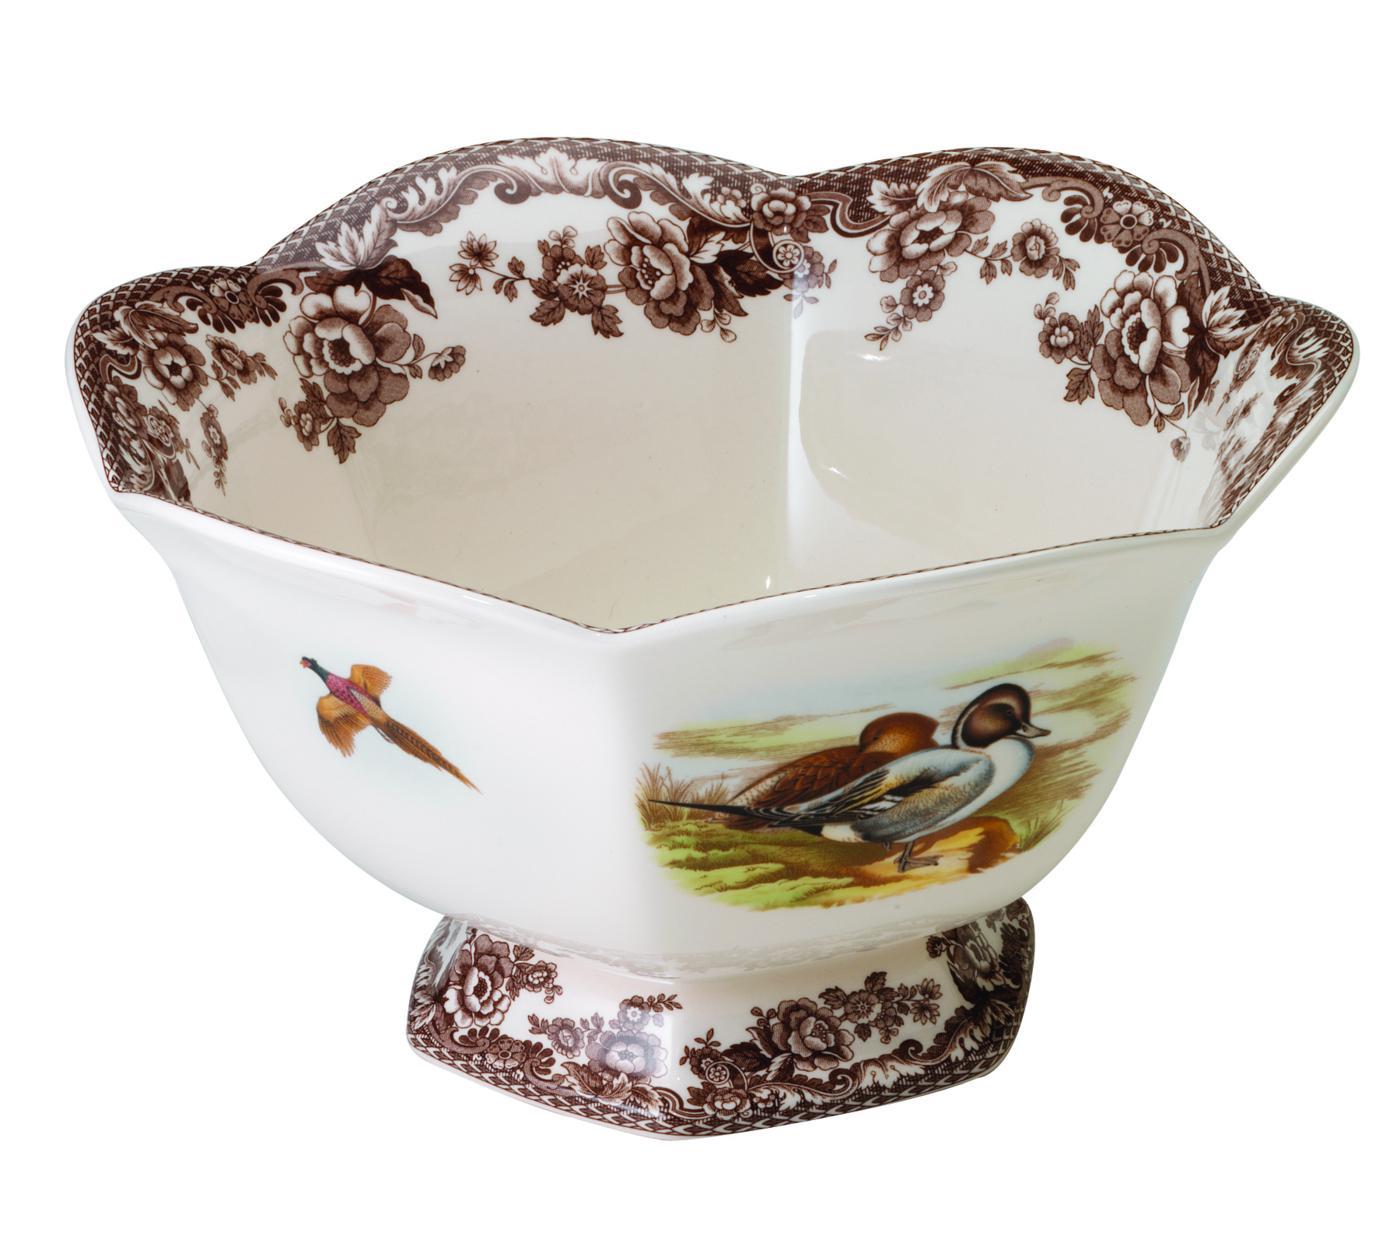 Woodland Hexagonal Footed Bowl 8.5 Inch, Lapwing/Pintail image number null